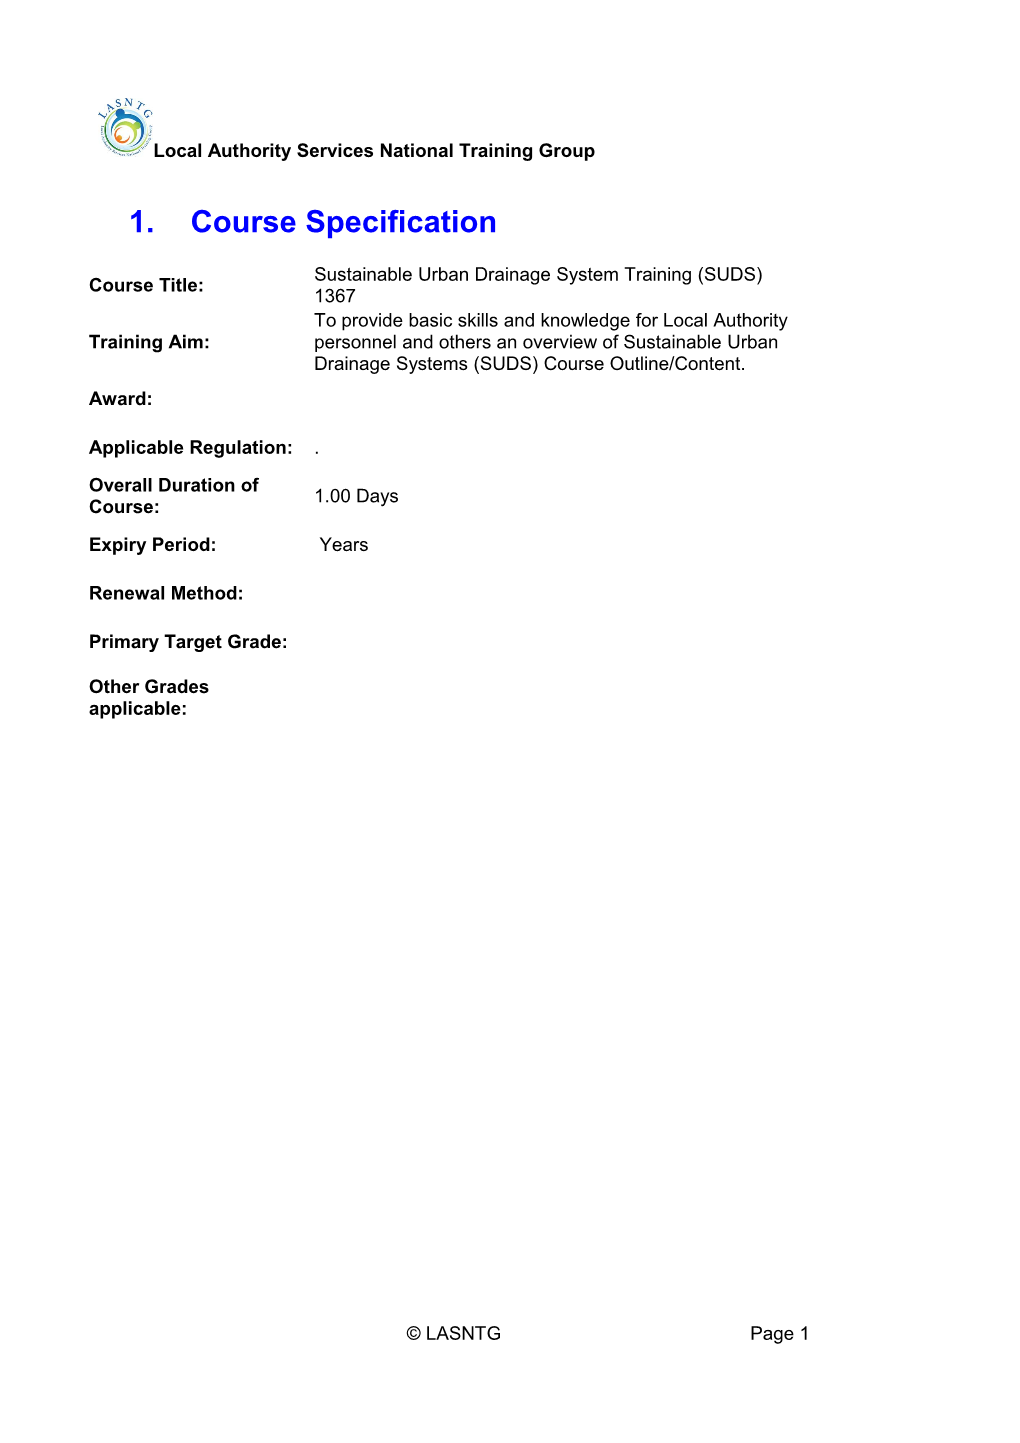 Course Specification s1